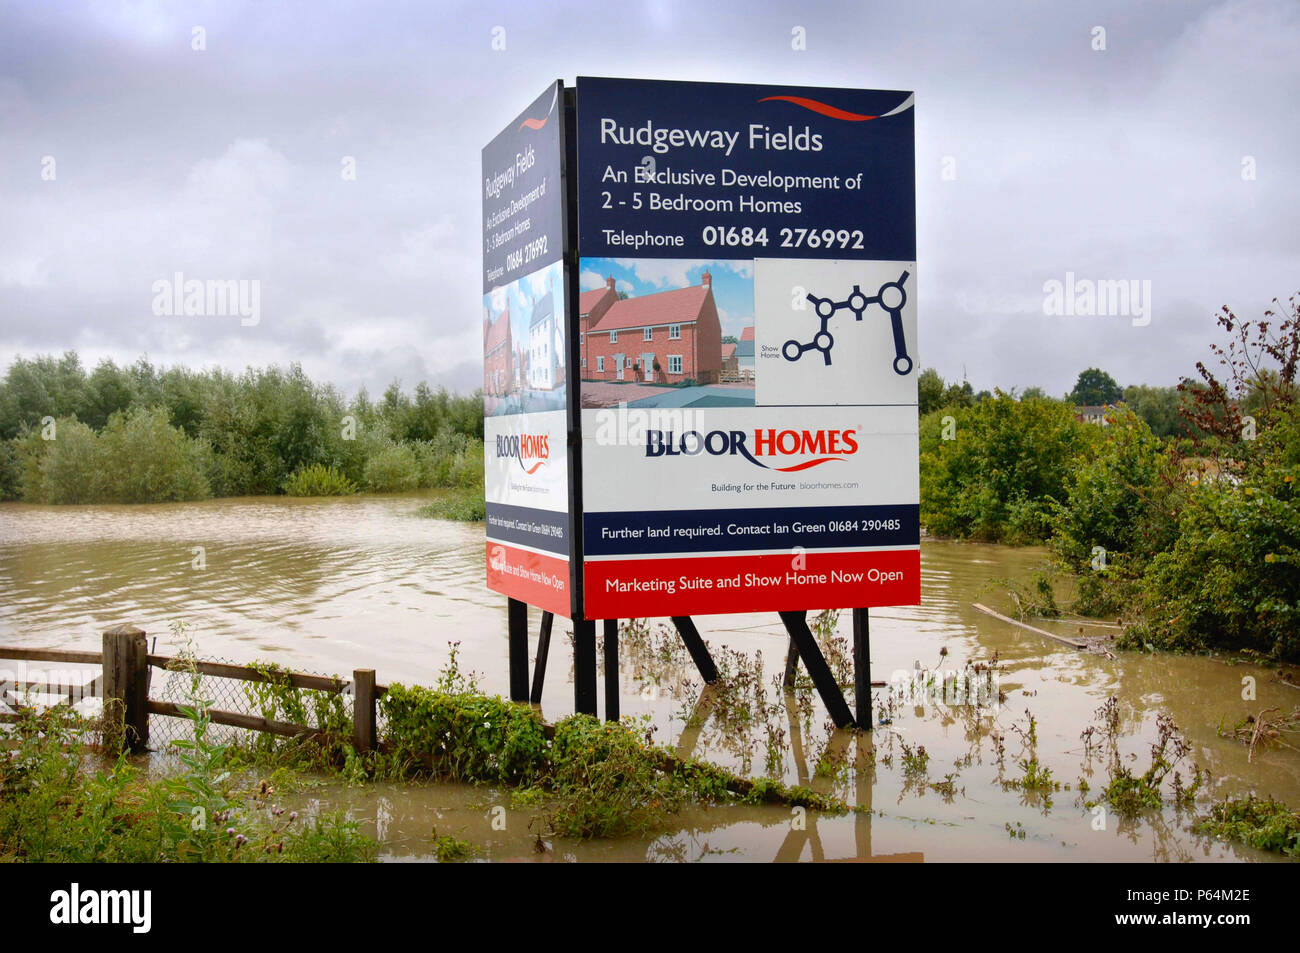 An advertising board for a planned housing development on land which is under floodwater in Tewkesbury, Gloucestershire, UK, 2007 Stock Photo